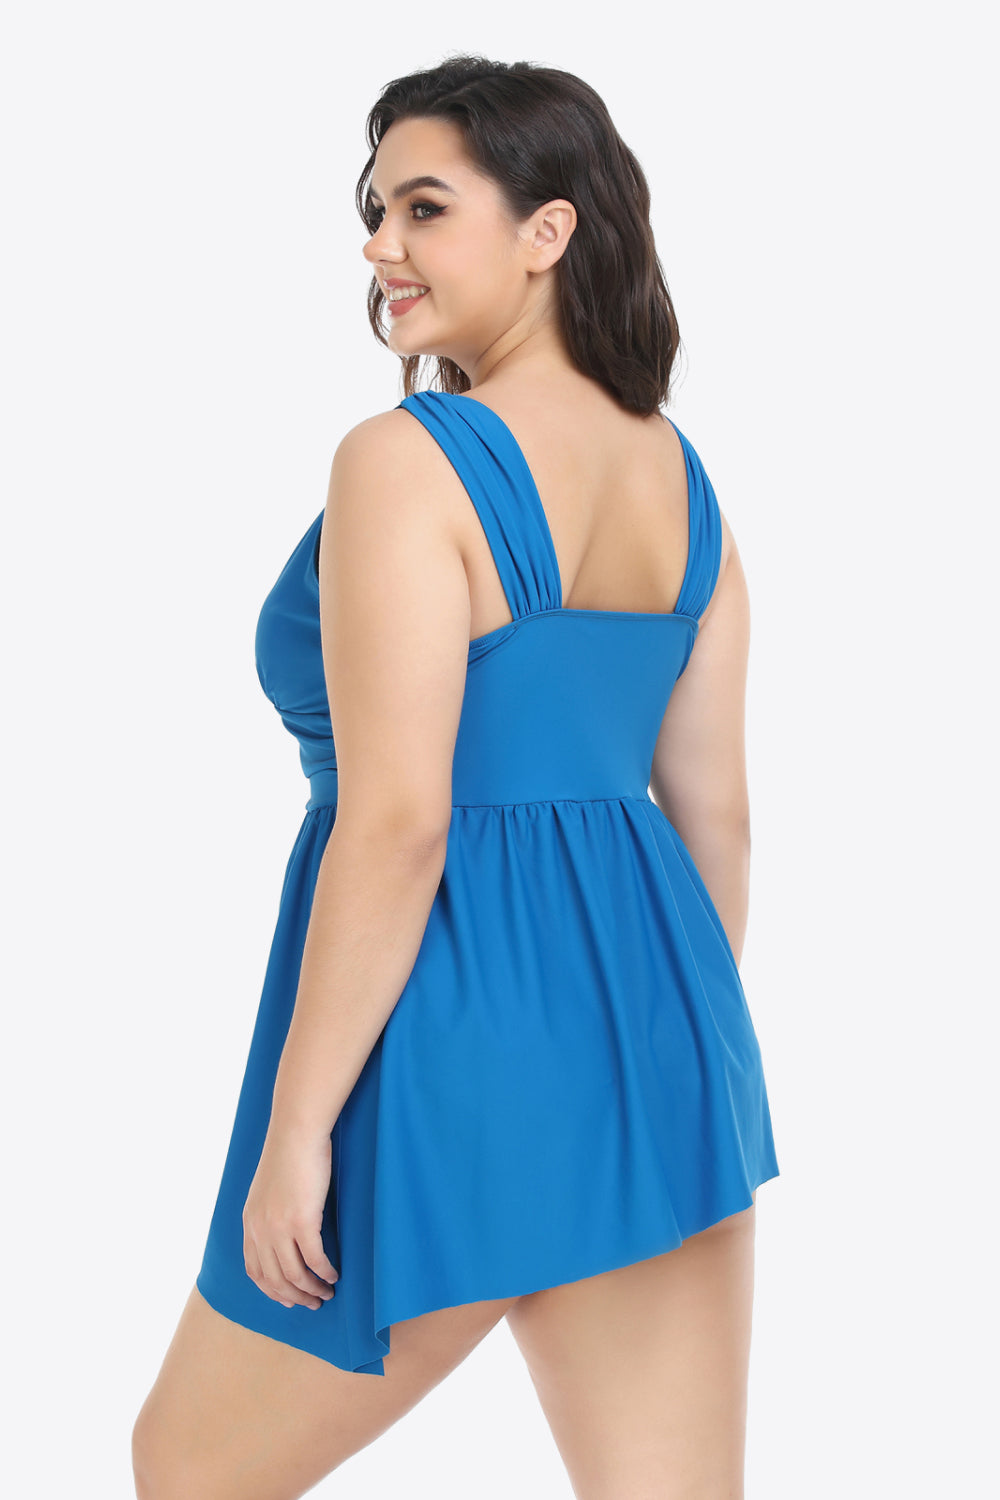 Steel Blue Plus Size Plunge Sleeveless Two-Piece Swimsuit Plus Size Clothes